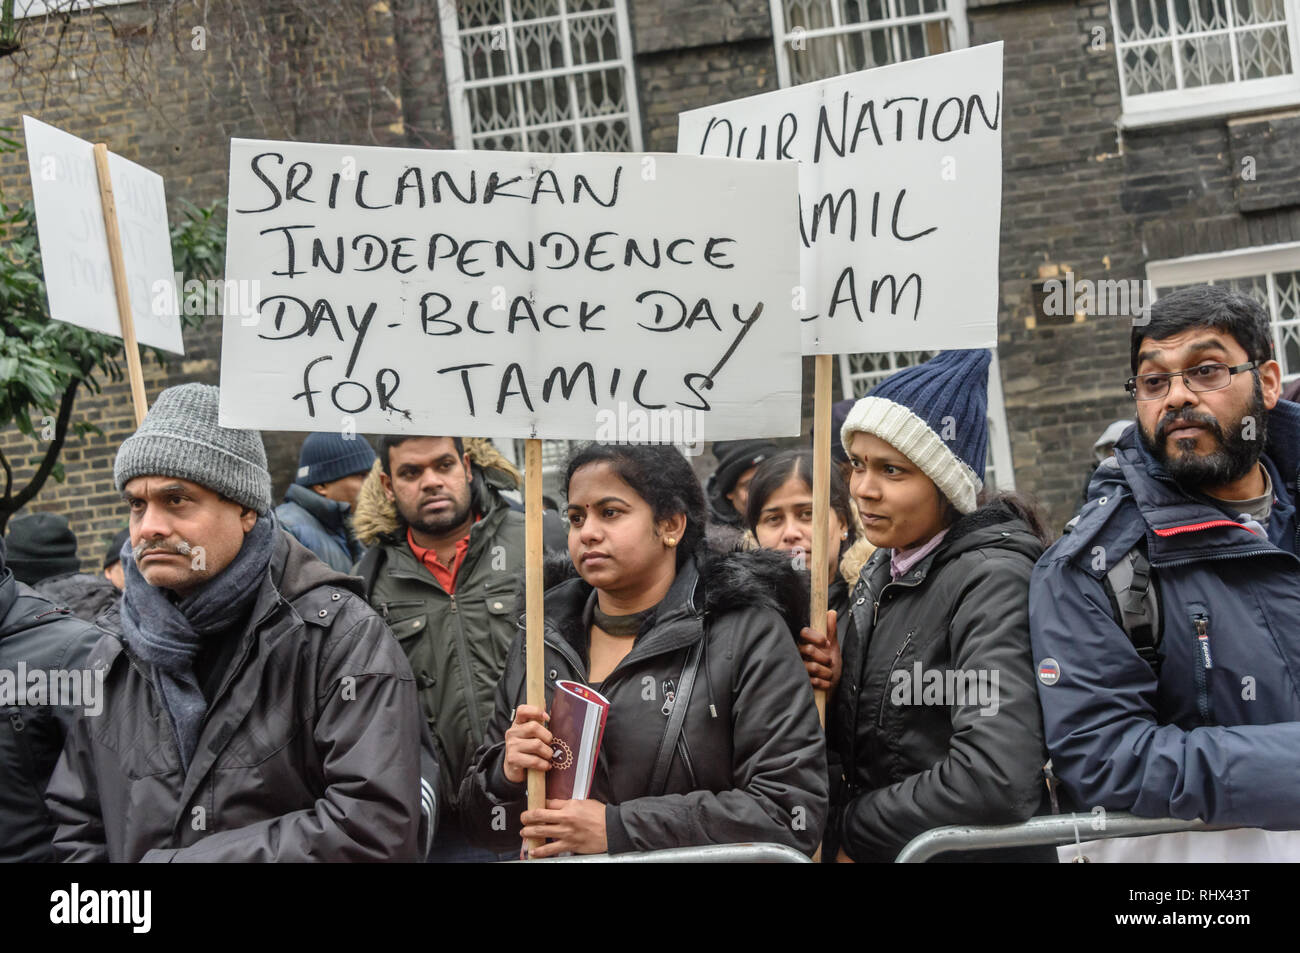 London, UK. 4th February 2019. Tamils protest outside the Sri Lanka High Commission, saying that his was a black day for Tamils in Sri Lanka. They demand the release of all political prisoners, an independent war crimes commission, information on the missing people and return of occupied land and call for the right to self-determination of the Tamil population. They support protesters in Sri Lanka who are protesting and fasting for the release of their land. Peter Marshall/Alamy Live News Stock Photo